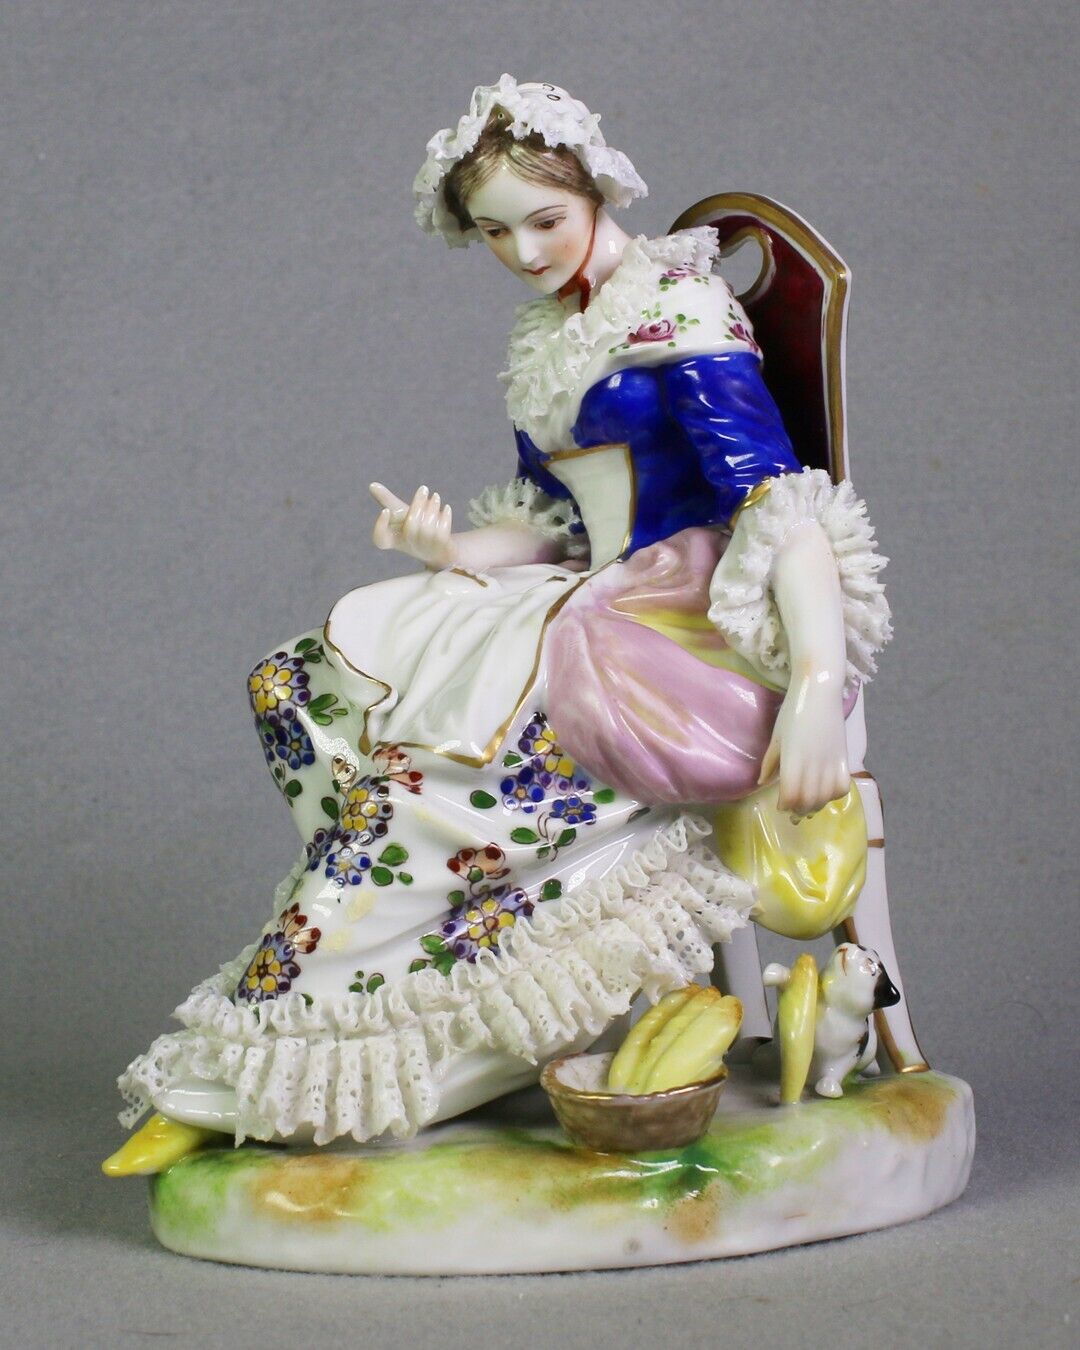 Antique Ludwigsburg Porcelain Seated Woman with Lace Bonnet, Dress & Playful Cat